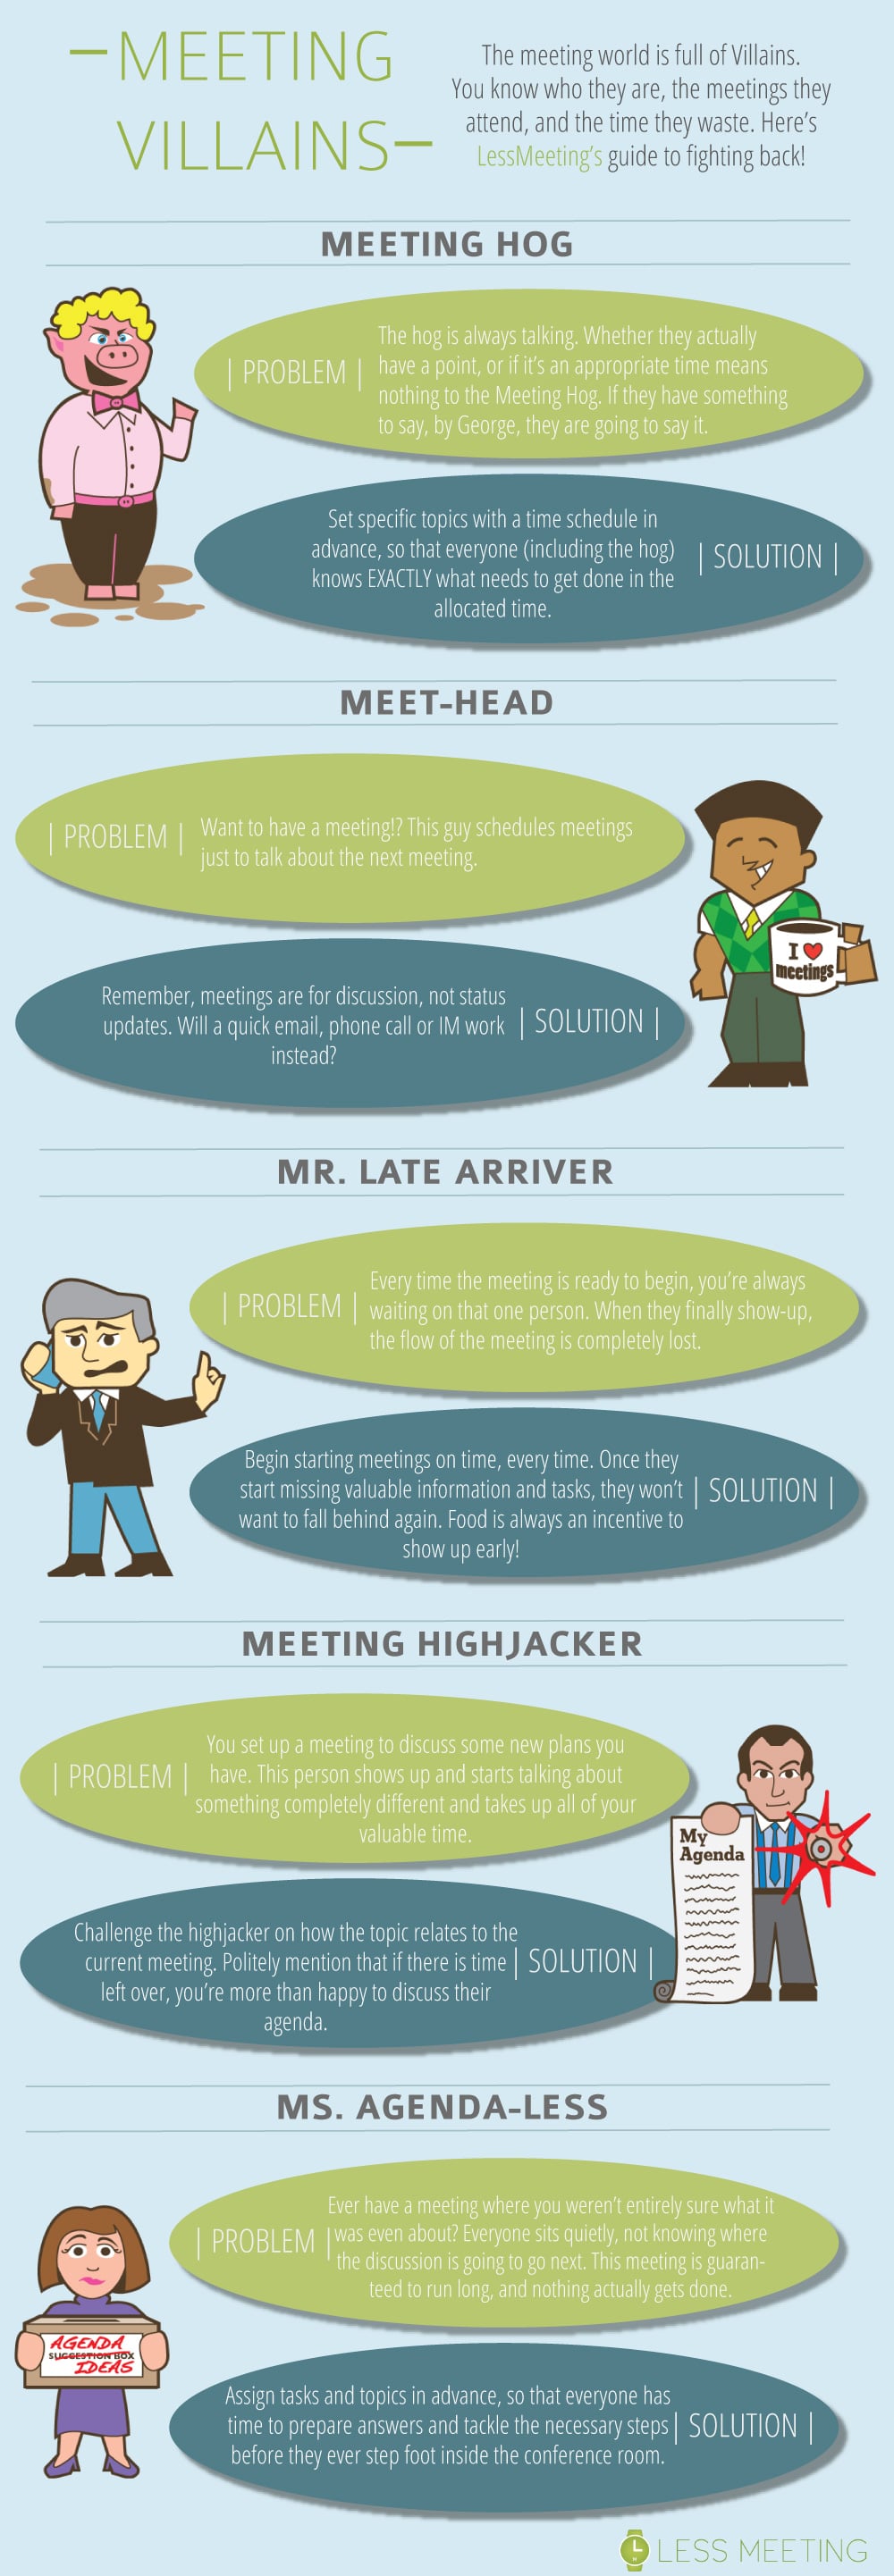 5 Kinds Of Business Meeting Villains Who Waste Your Time [Infographic]